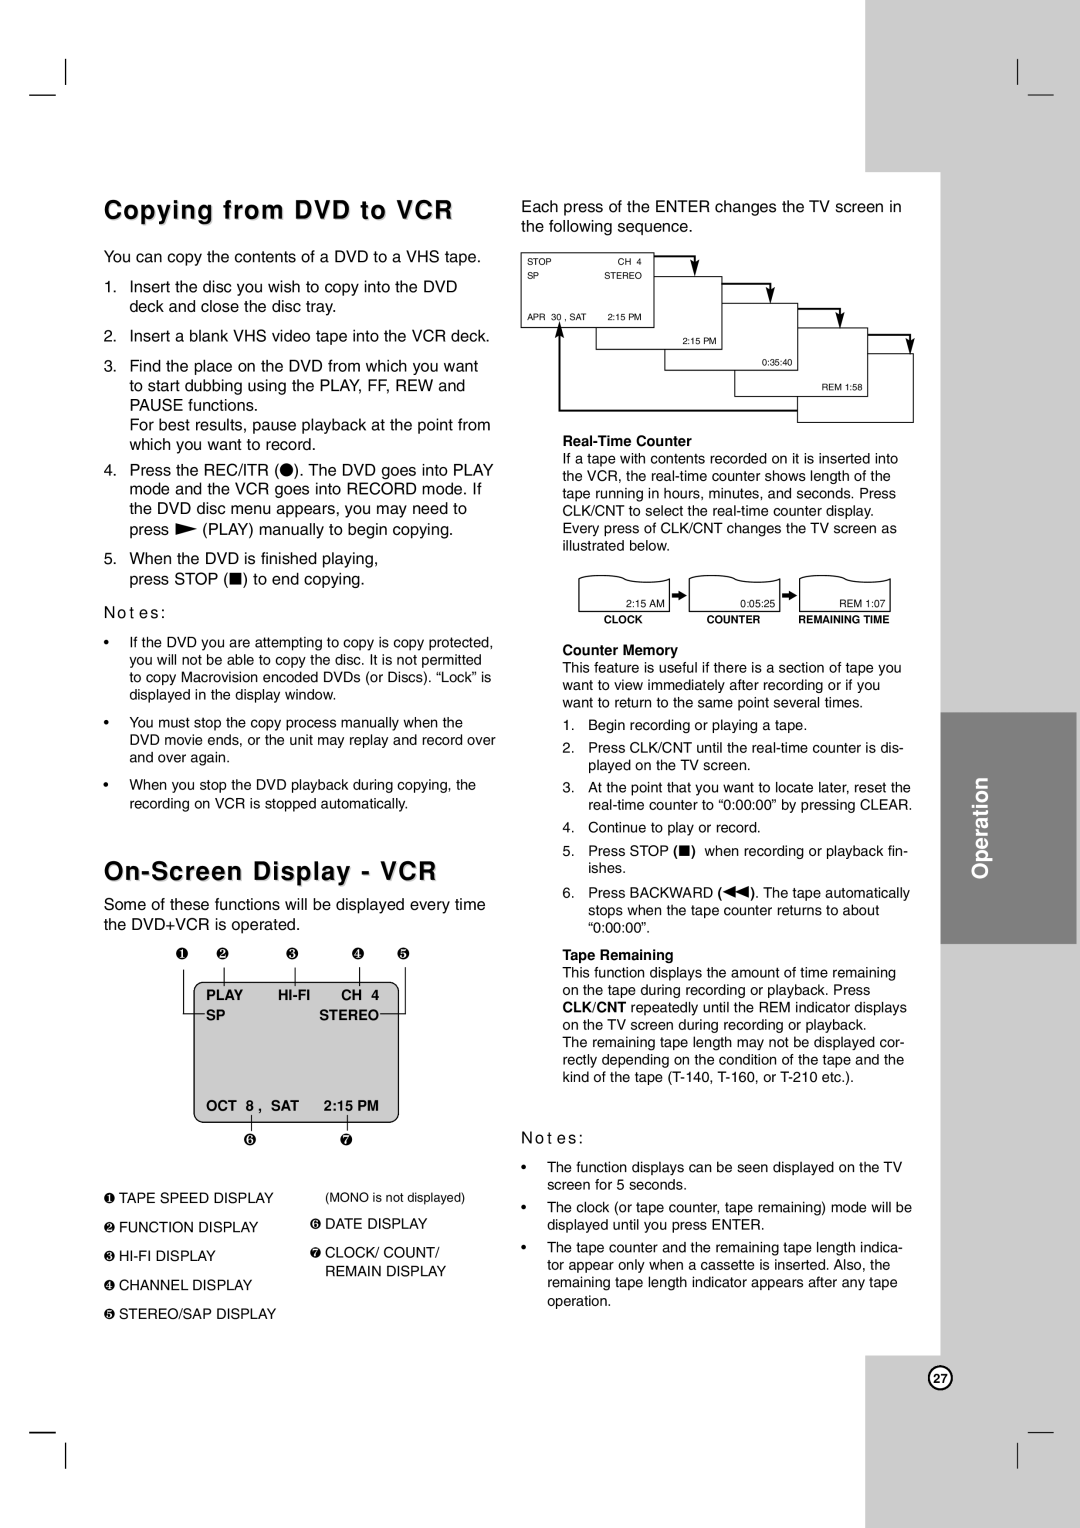 LG Electronics LDX-514 owner manual Copying from DVD to VCR, On-Screen Display - VCR, Operation 